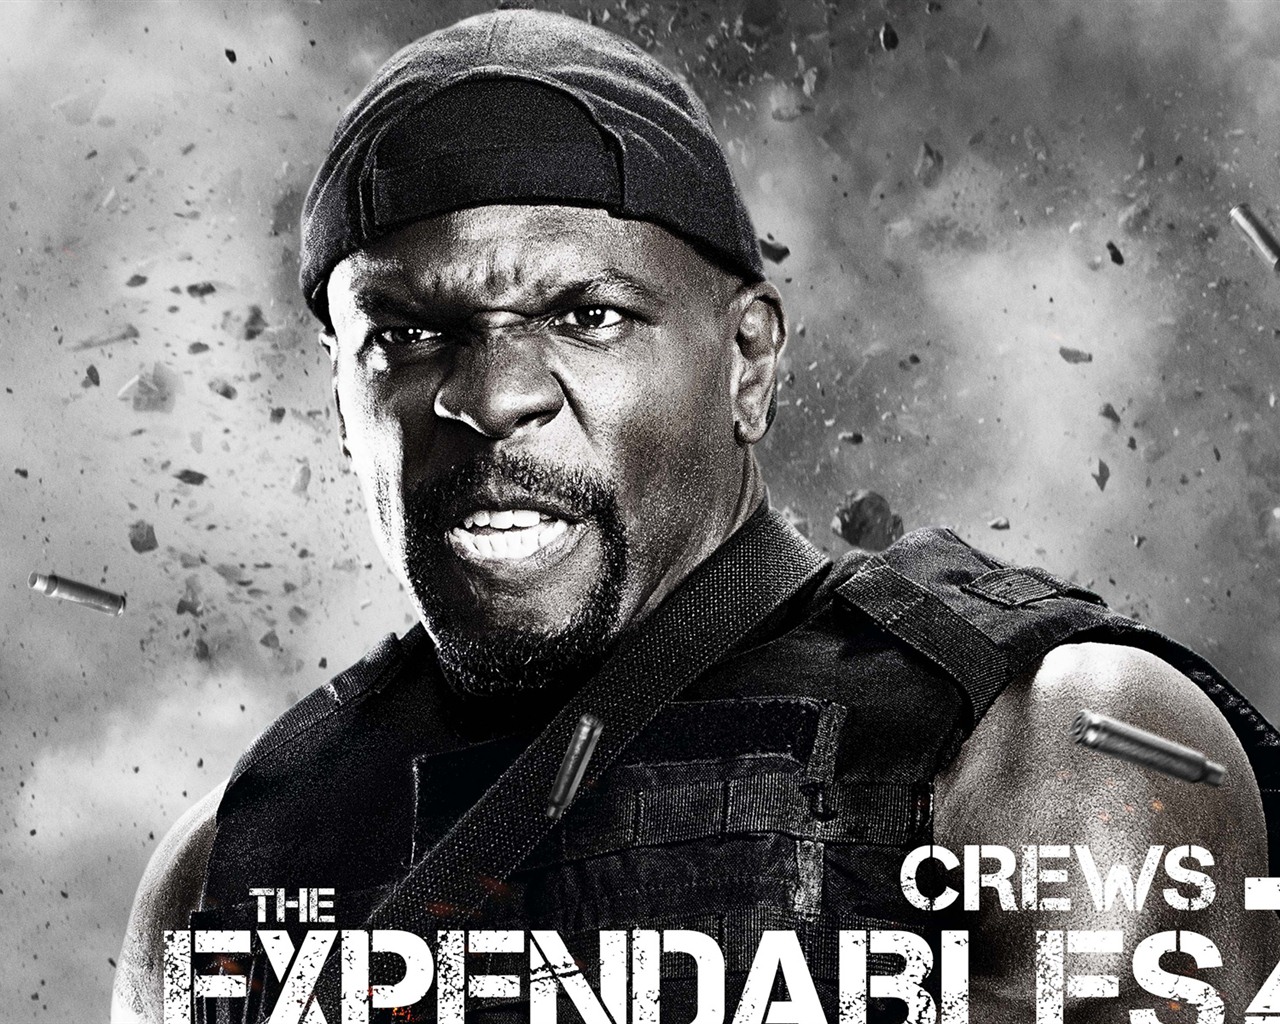 2012 Expendables2 HDの壁紙 #10 - 1280x1024